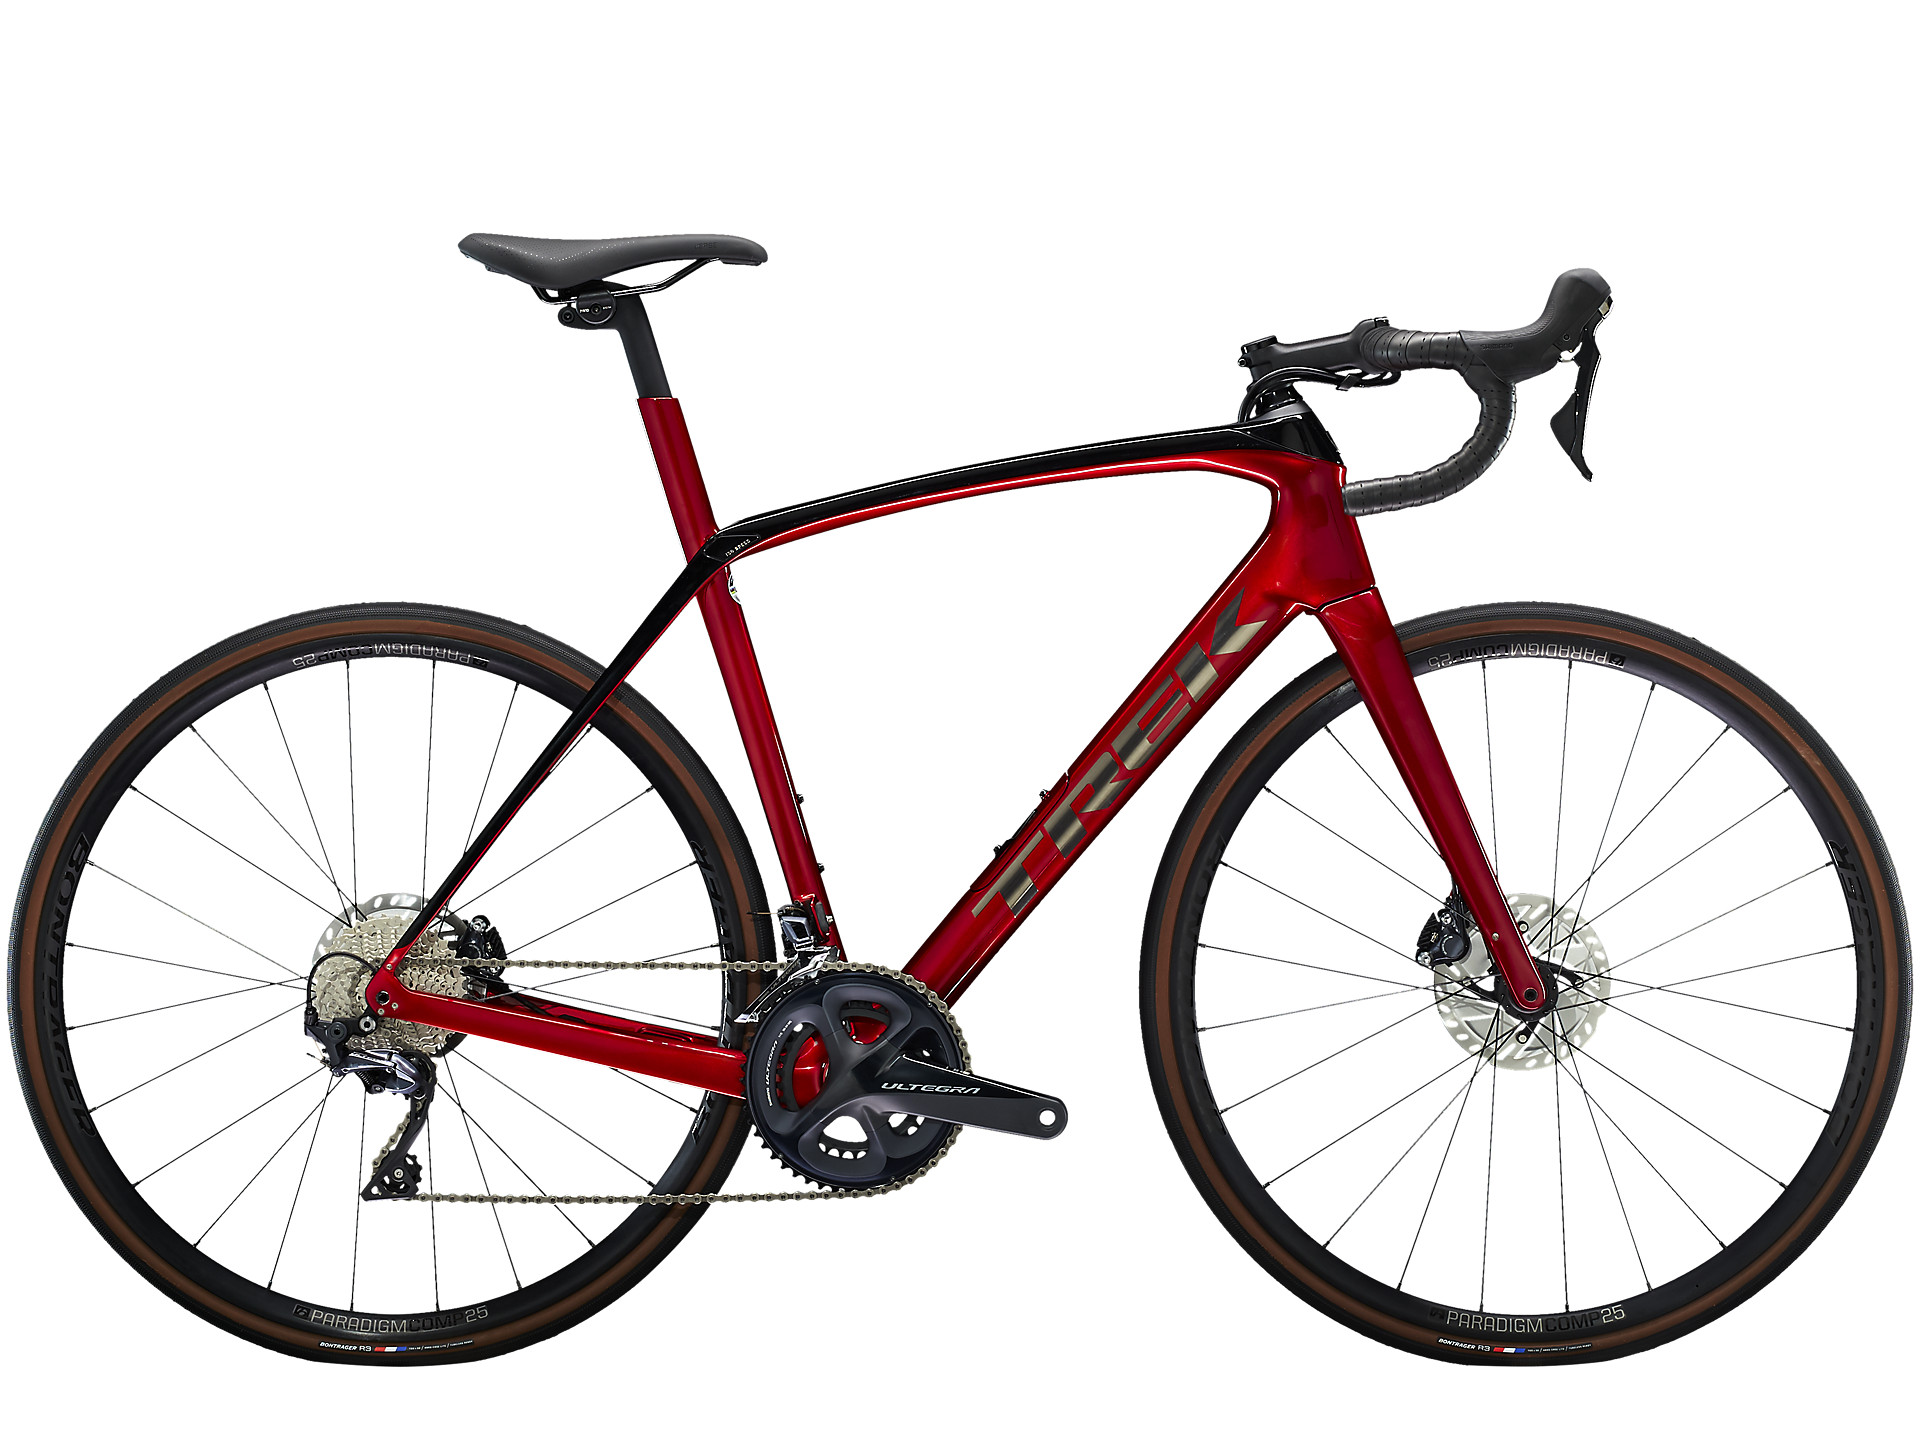 <a href="https://cycles-clement.be/product/domane-sl-6-58-crimson-trek-black/">DOMANE SL 6 58 CRIMSON/TREK BLACK</a>